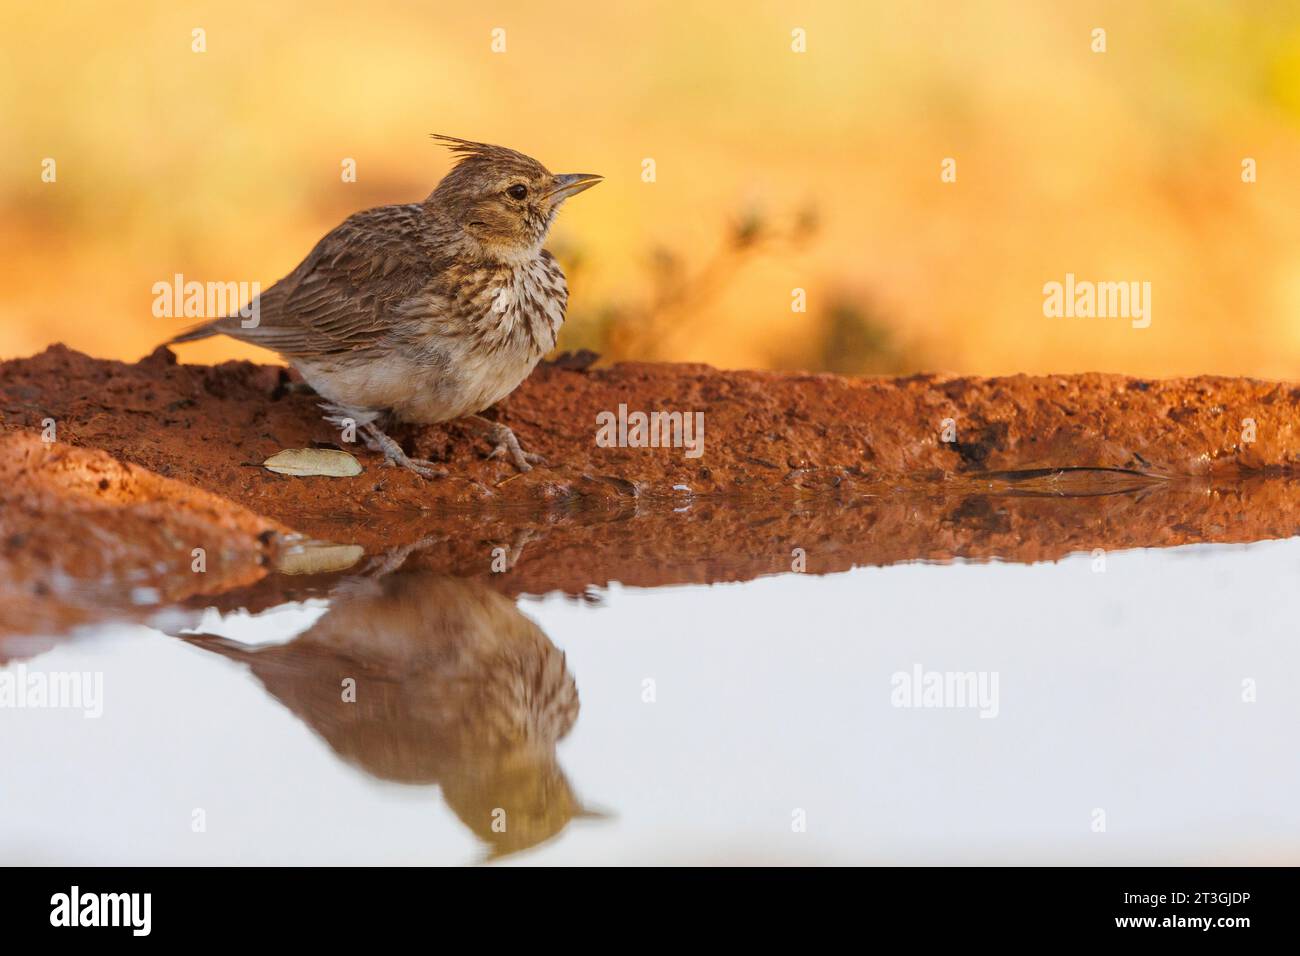 Spain, Province of Castilla-La Mancha, private property, Crested lark (Galerida cristata), on the ground, drinking from a waterhole Stock Photo